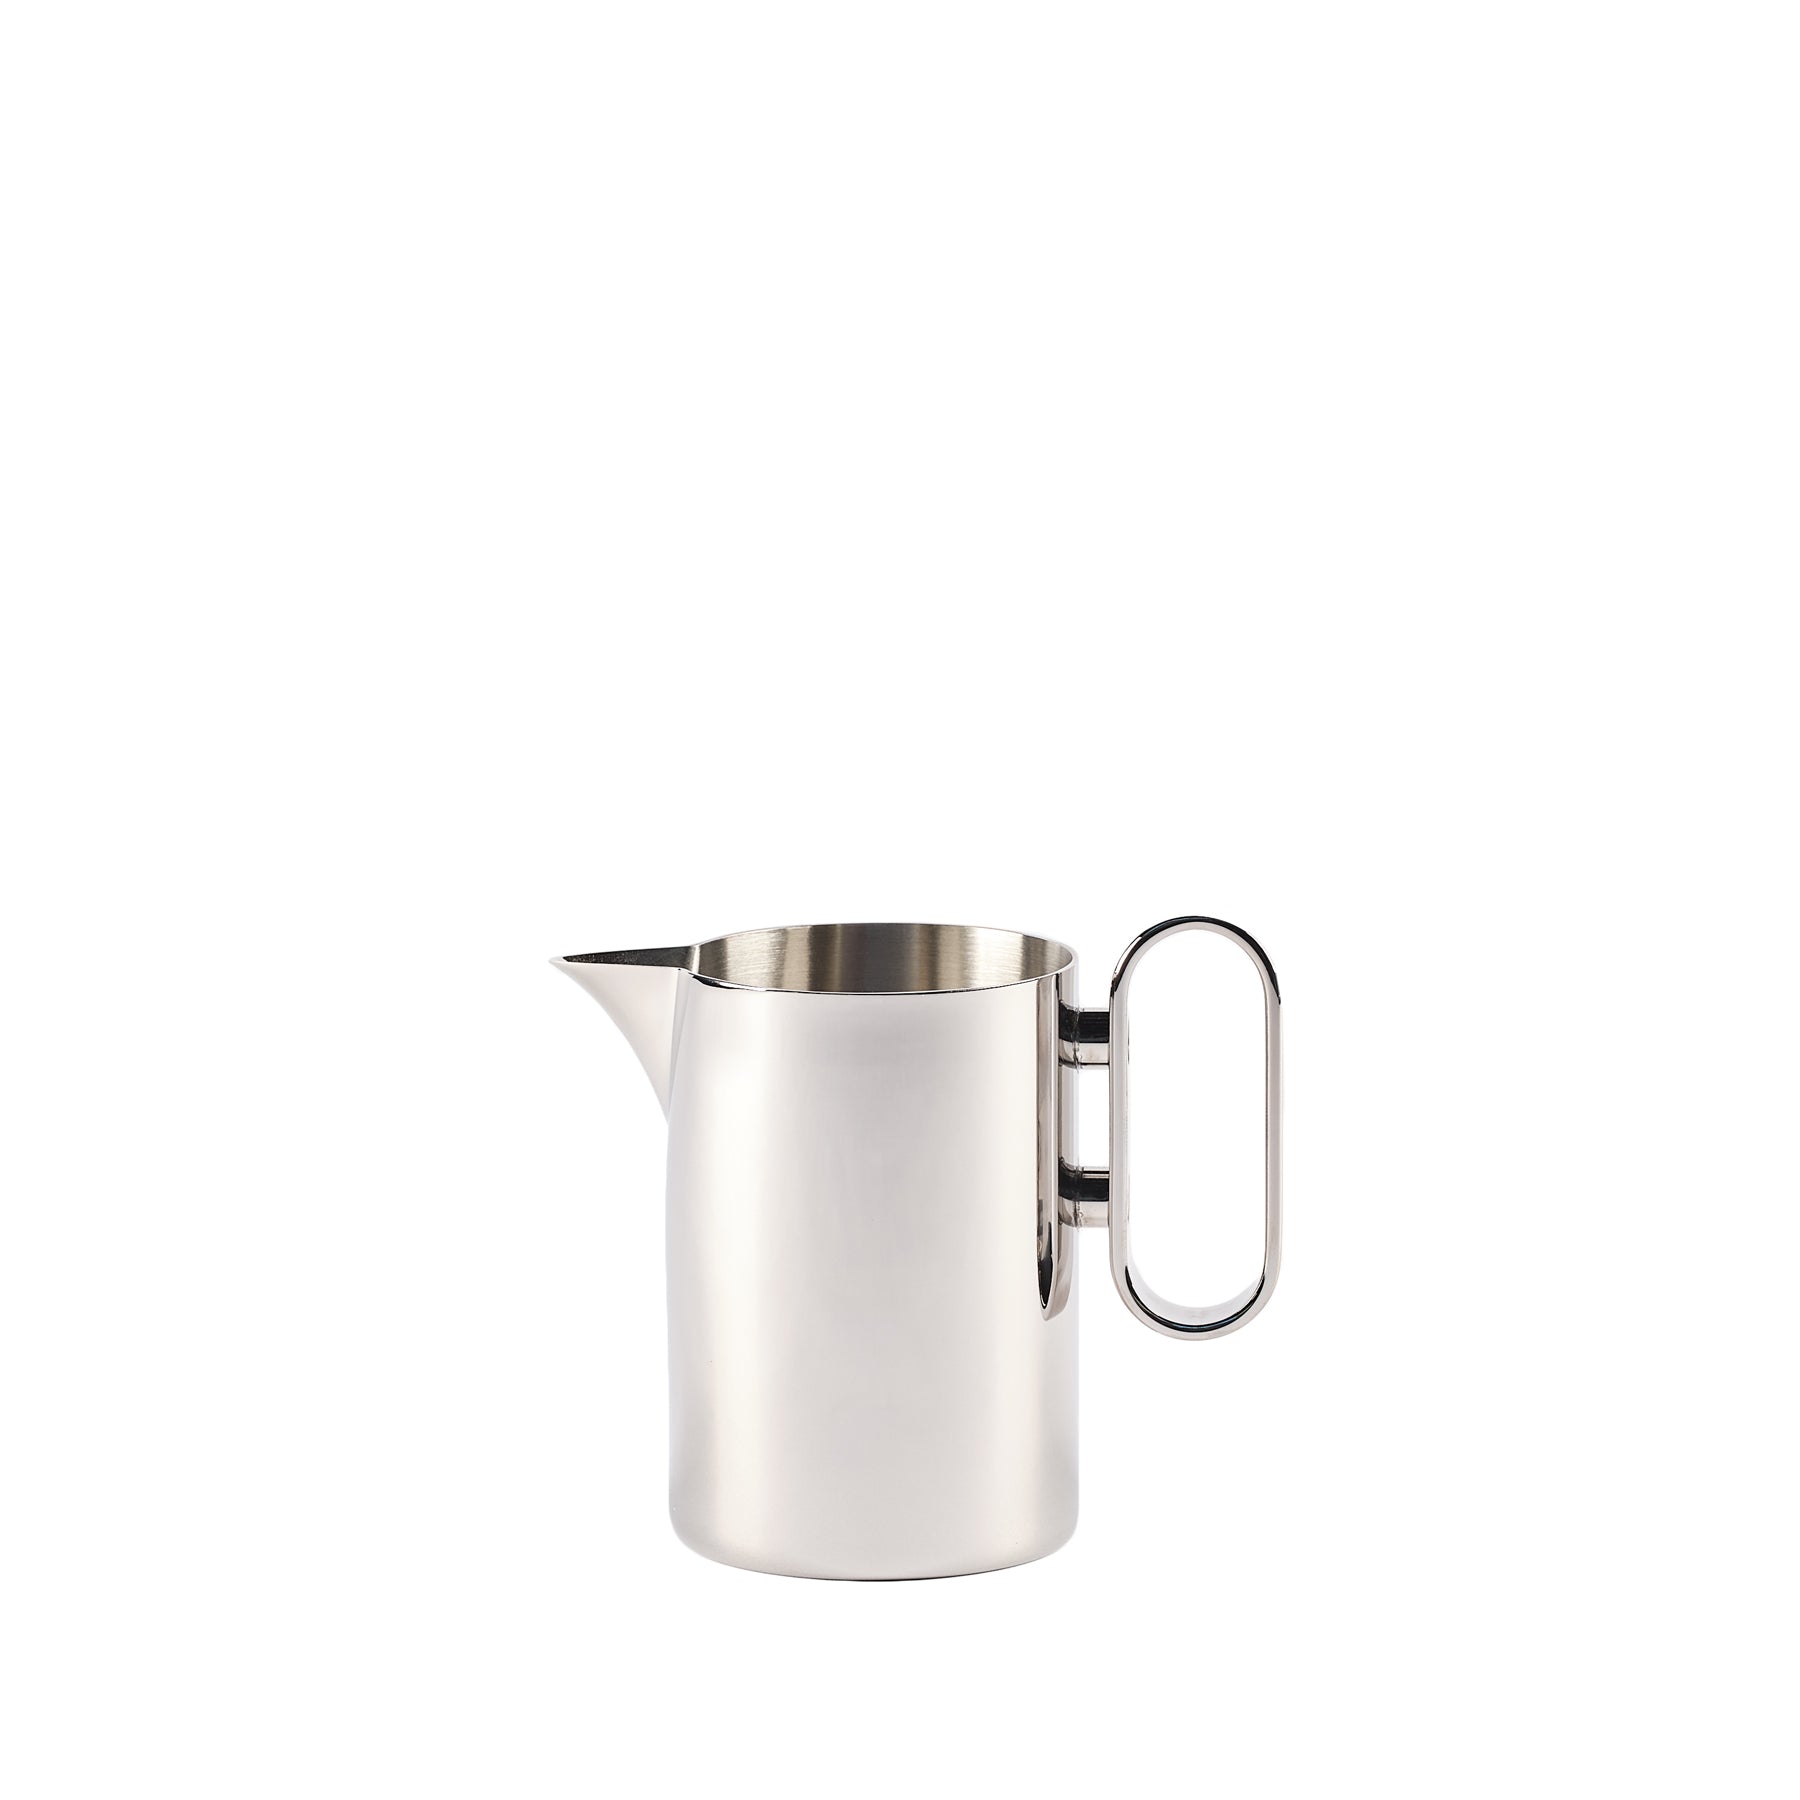 Stainless Steel Creamer Zoom Image 1